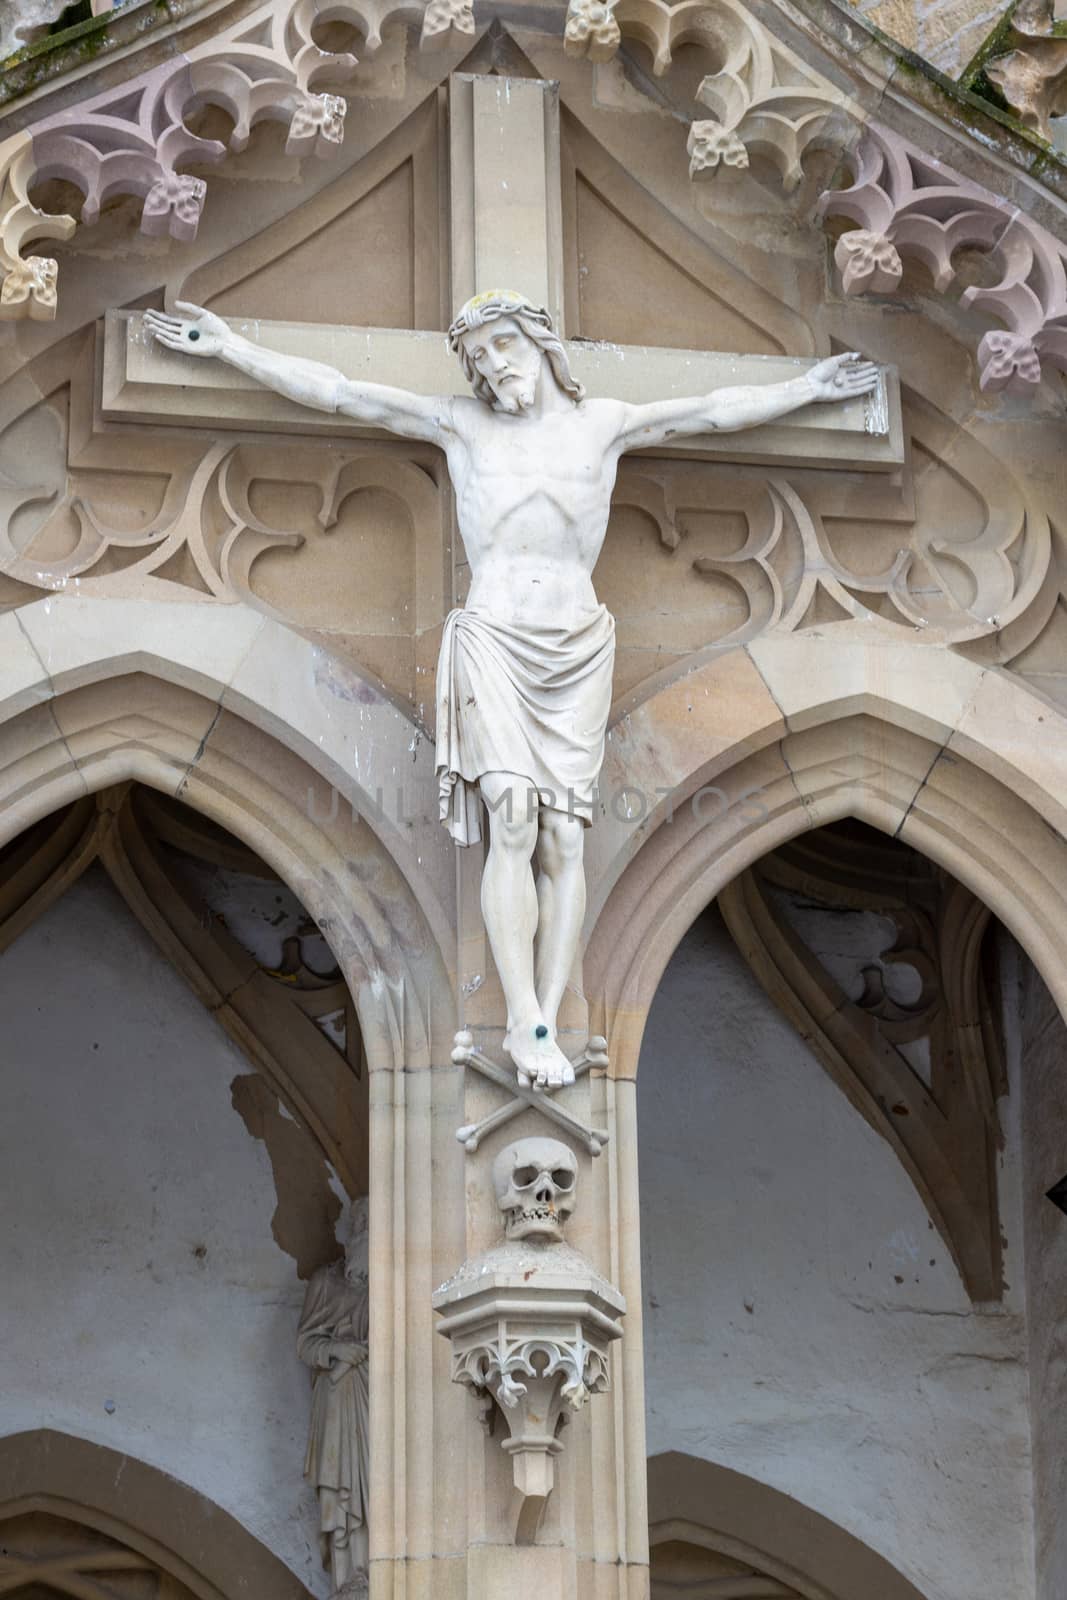 Crucifix at entrance of the castle church in Meisenheim by reinerc